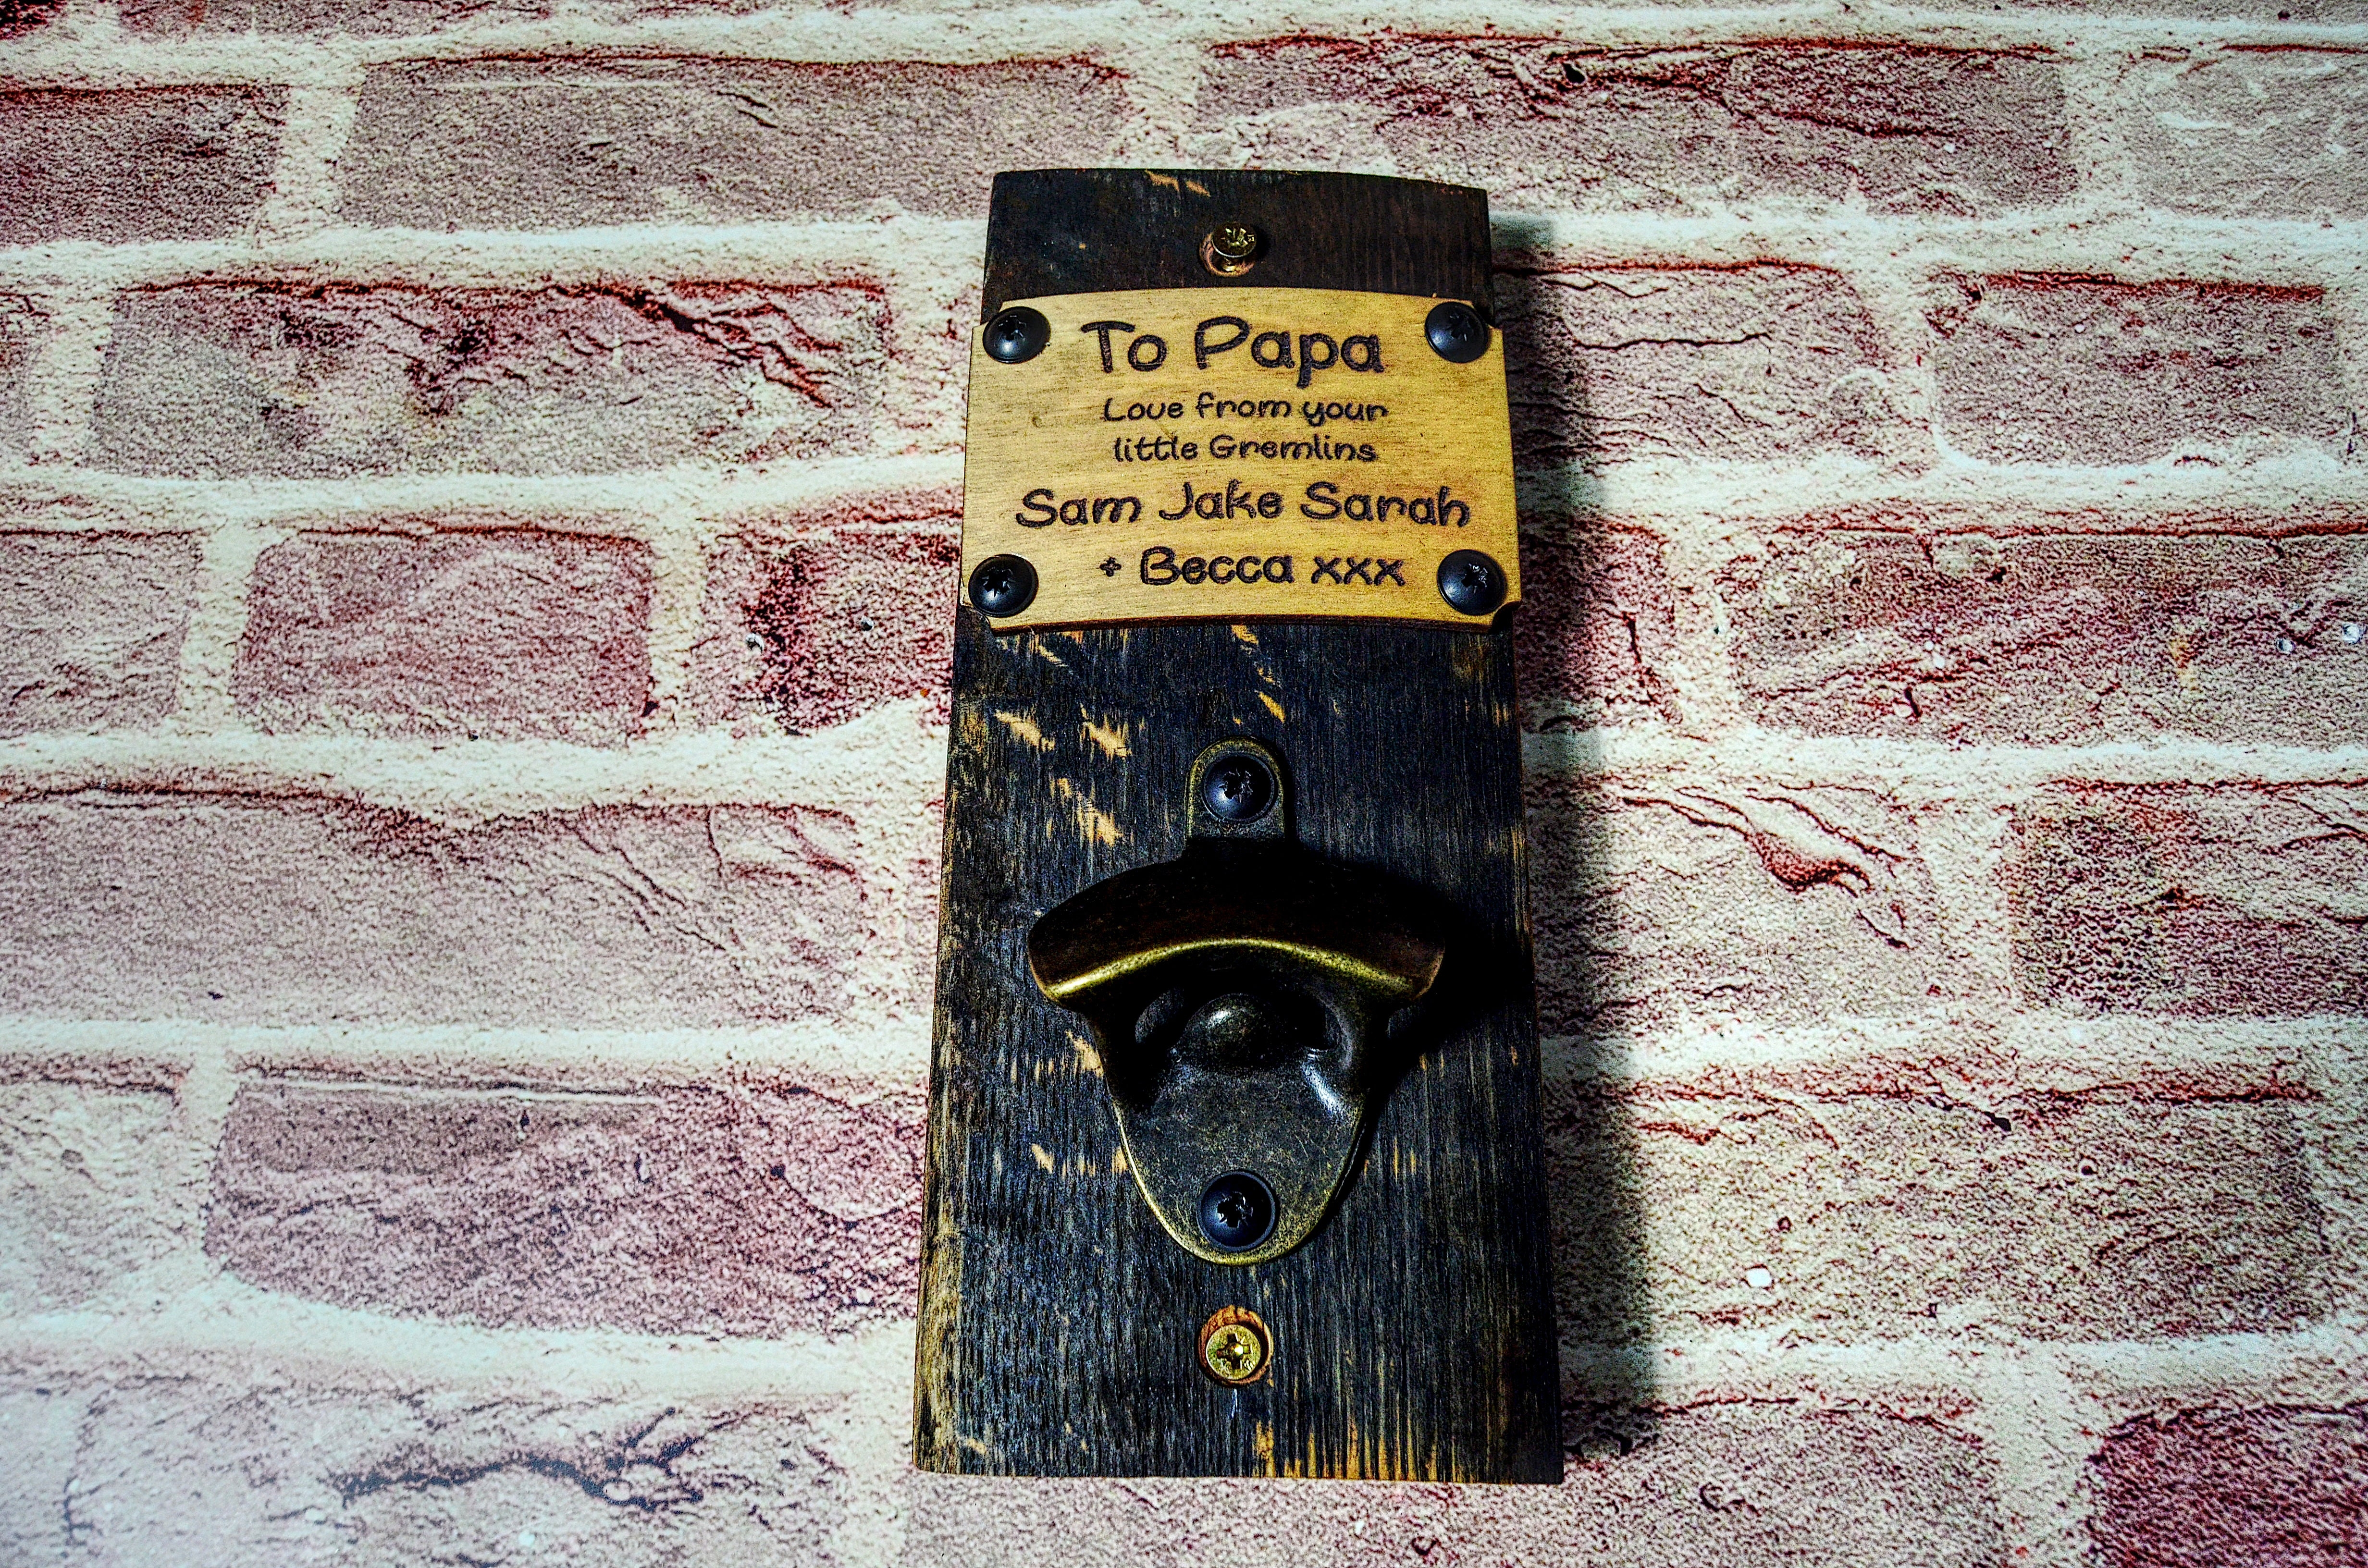 upcycLED whisky barrel beer bottle opener Love from the reasons you drink – Forth Craft & Designs